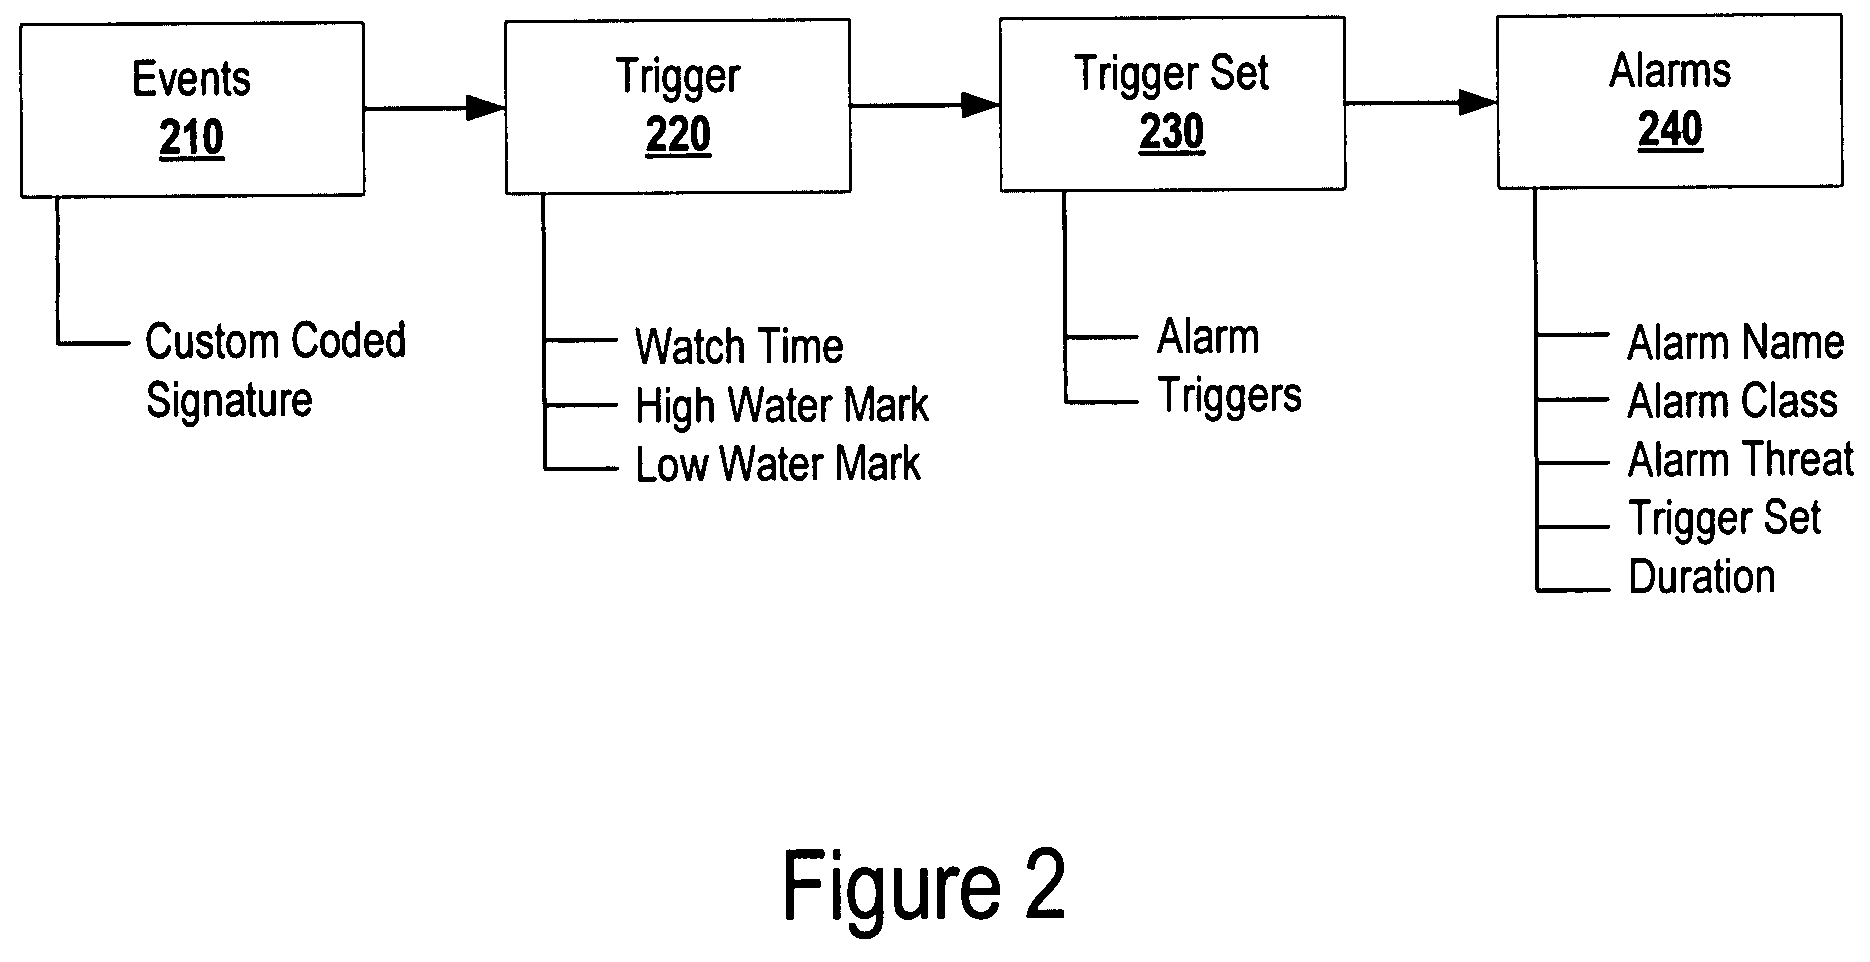 Systems and methods for generating, managing, and displaying alarms for wireless network monitoring